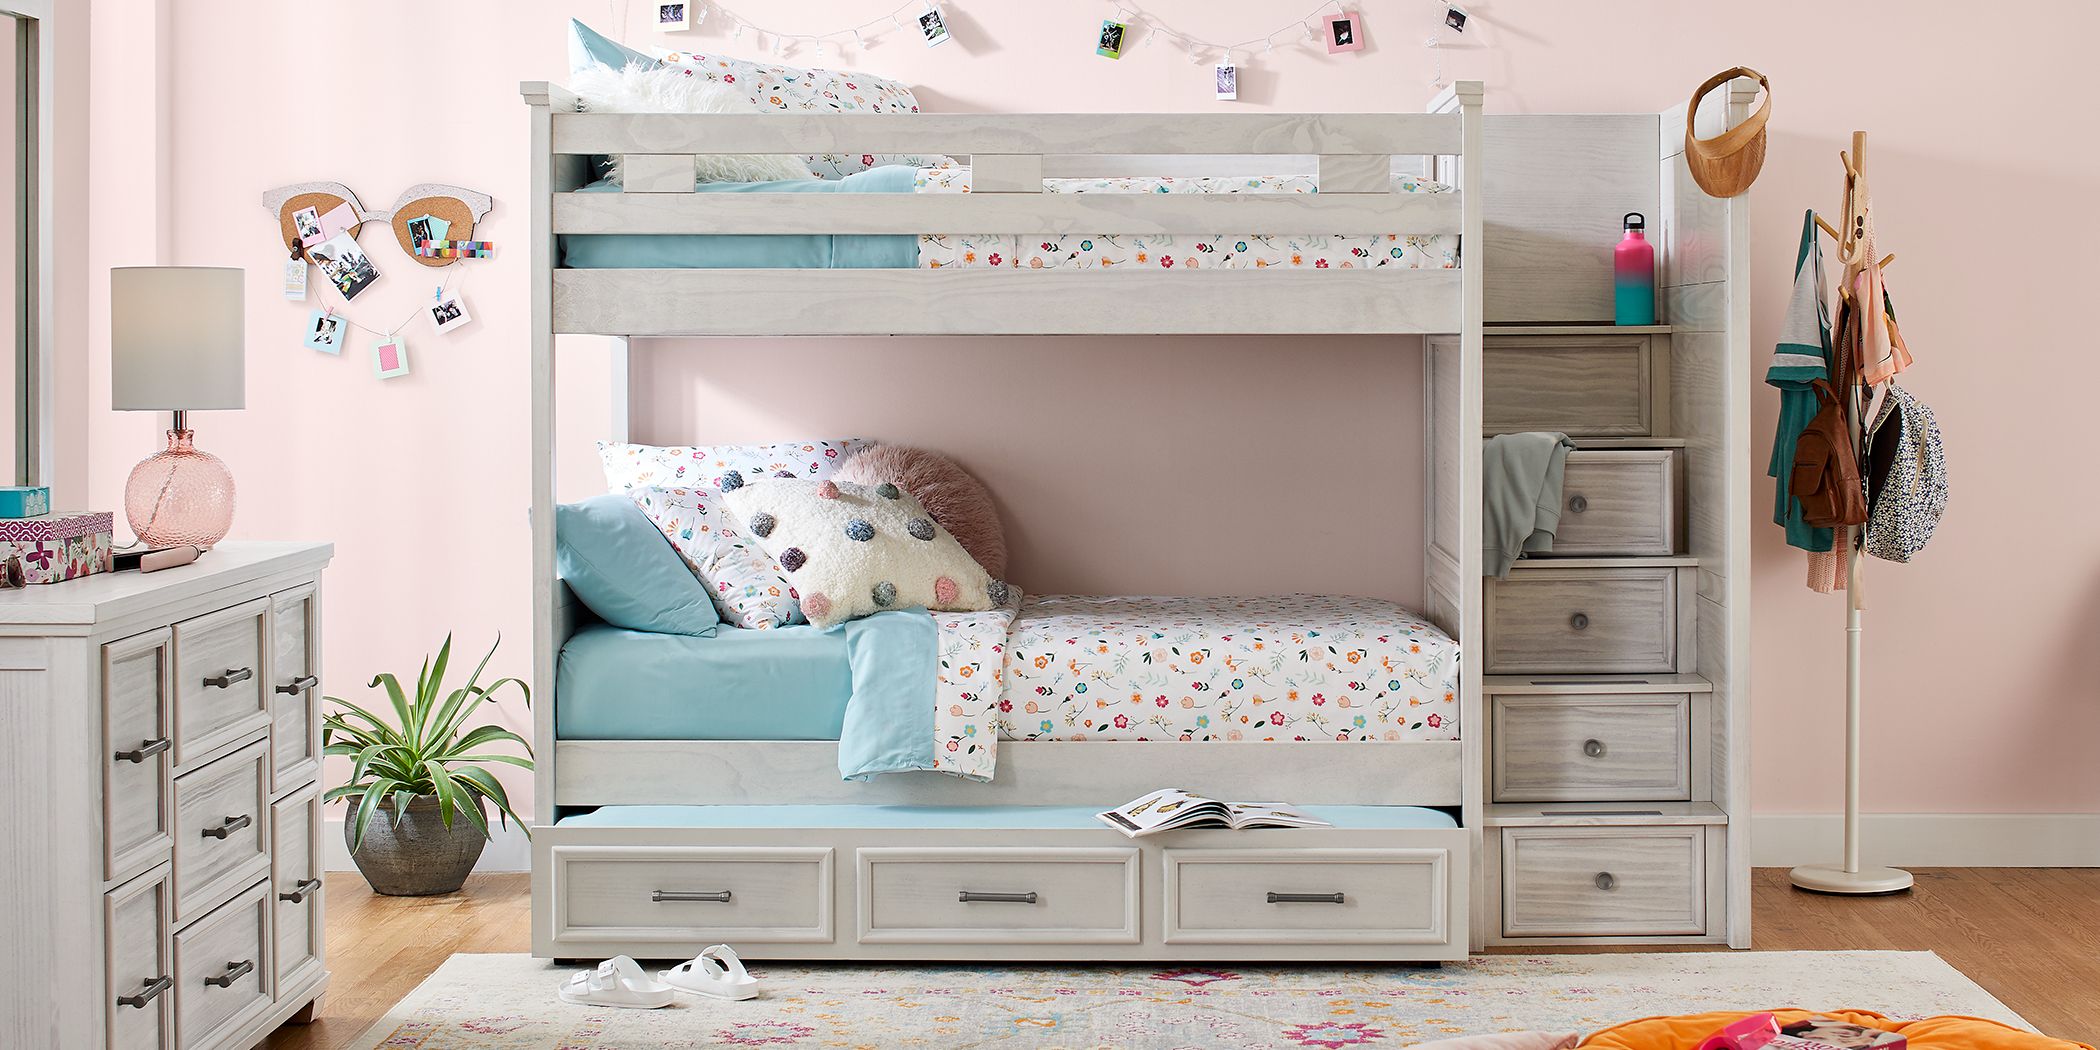 Bunk Beds With Storage Space, Kids Bunk Bed Sets